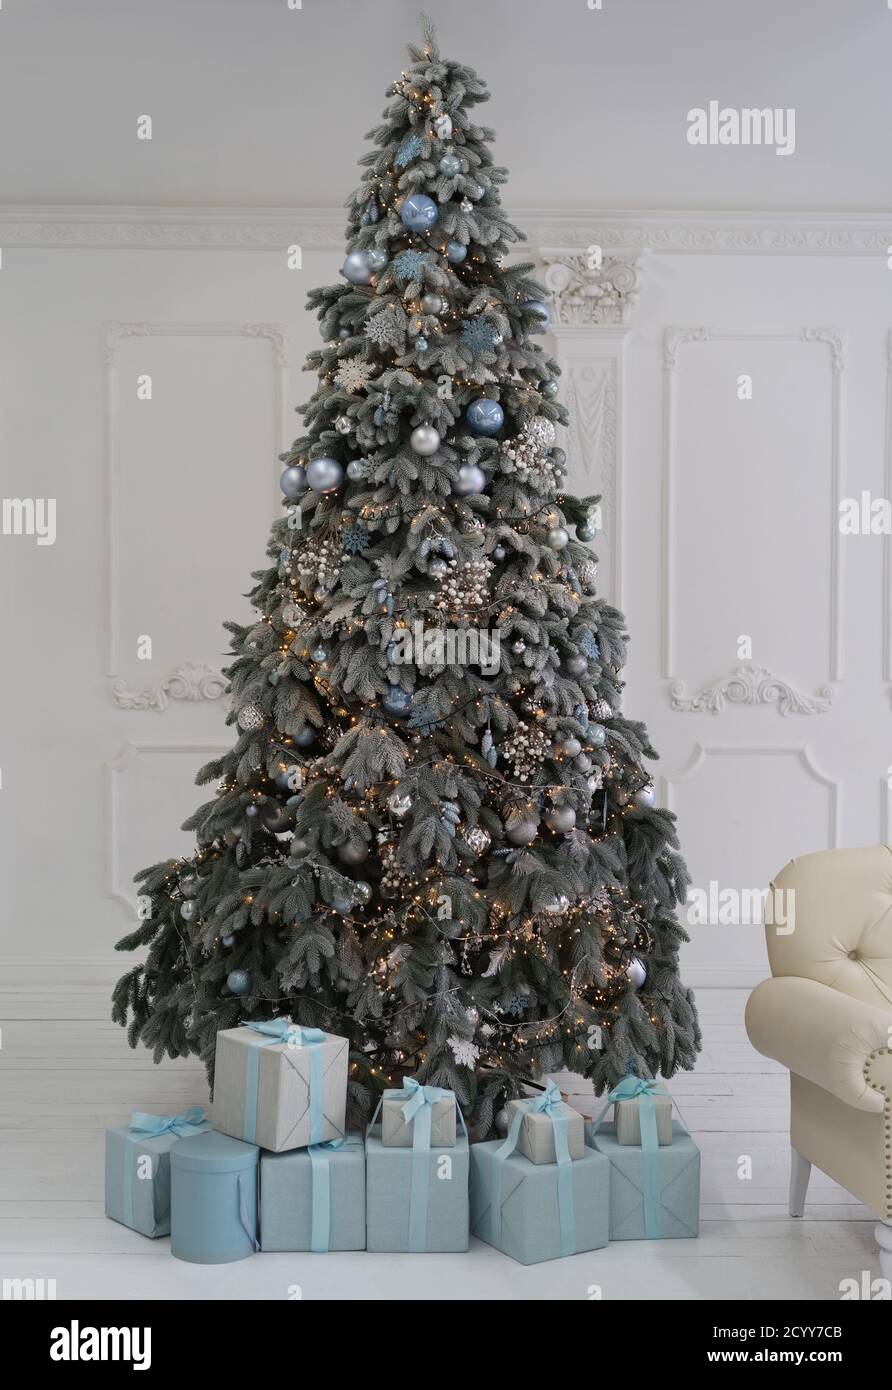 Large Christmas tree against a white wall. Gifts in boxes lie under the tree, decorated with ribbon. On the Christmas tree balls and garlands. High Stock Photo